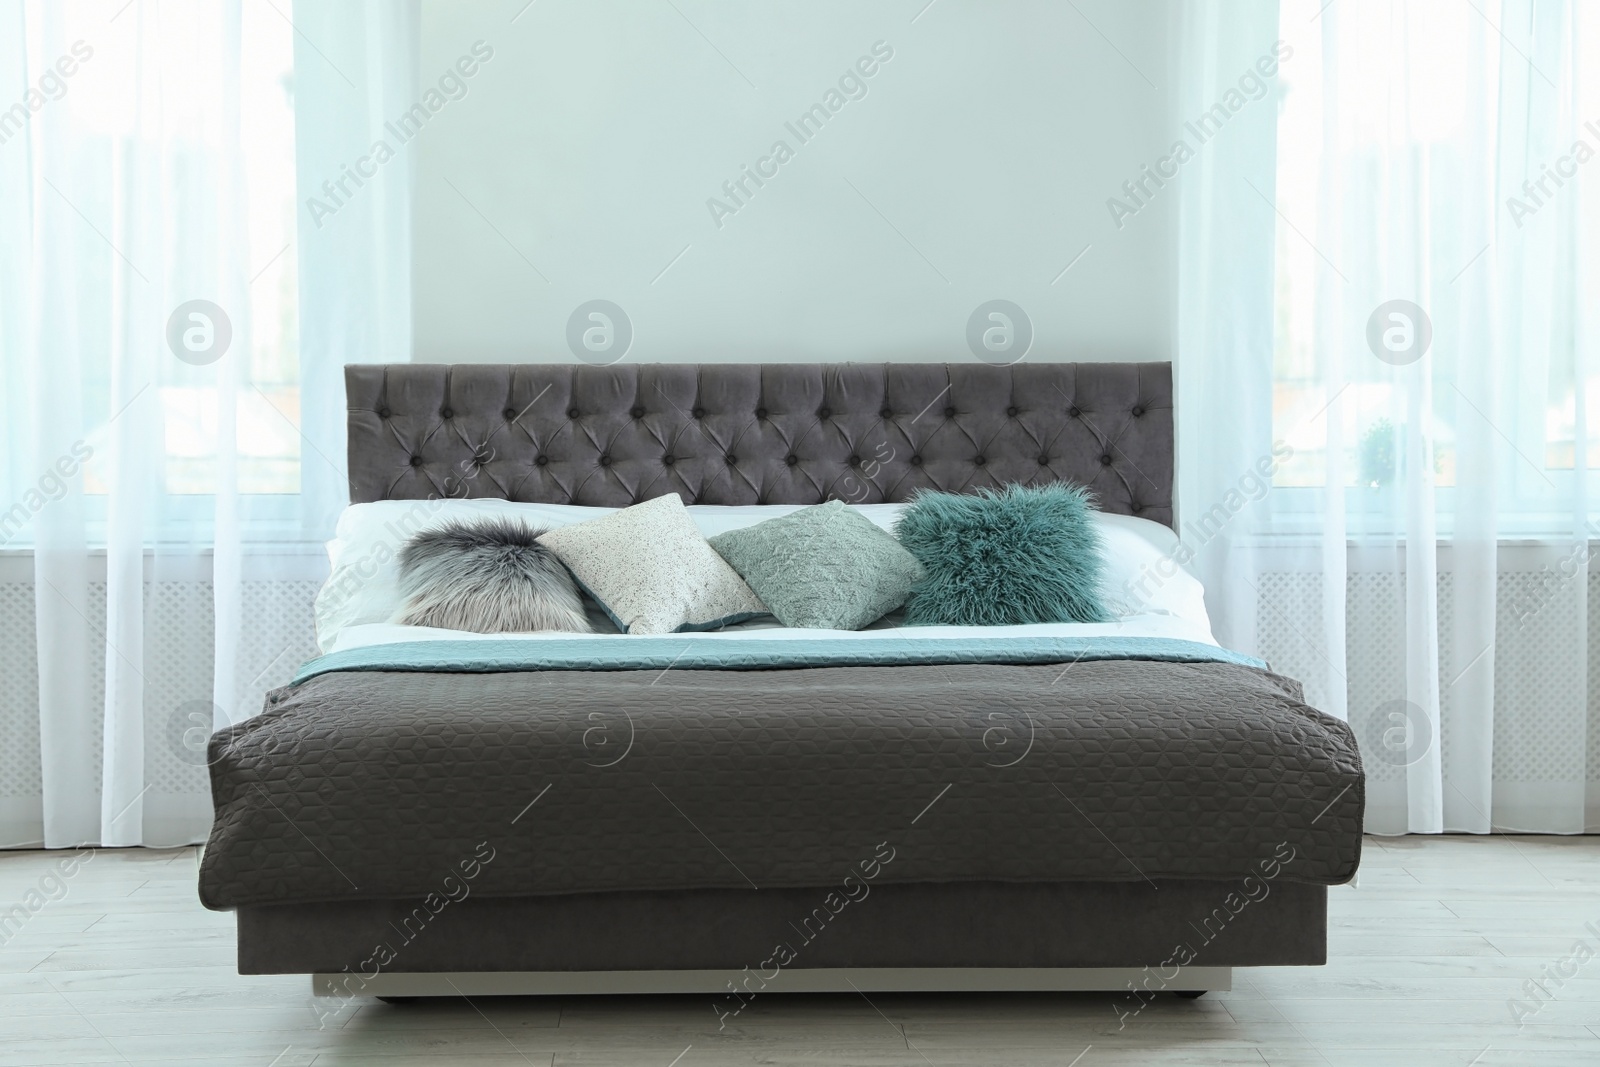 Photo of Comfortable bed with pillows and plaid in modern room interior